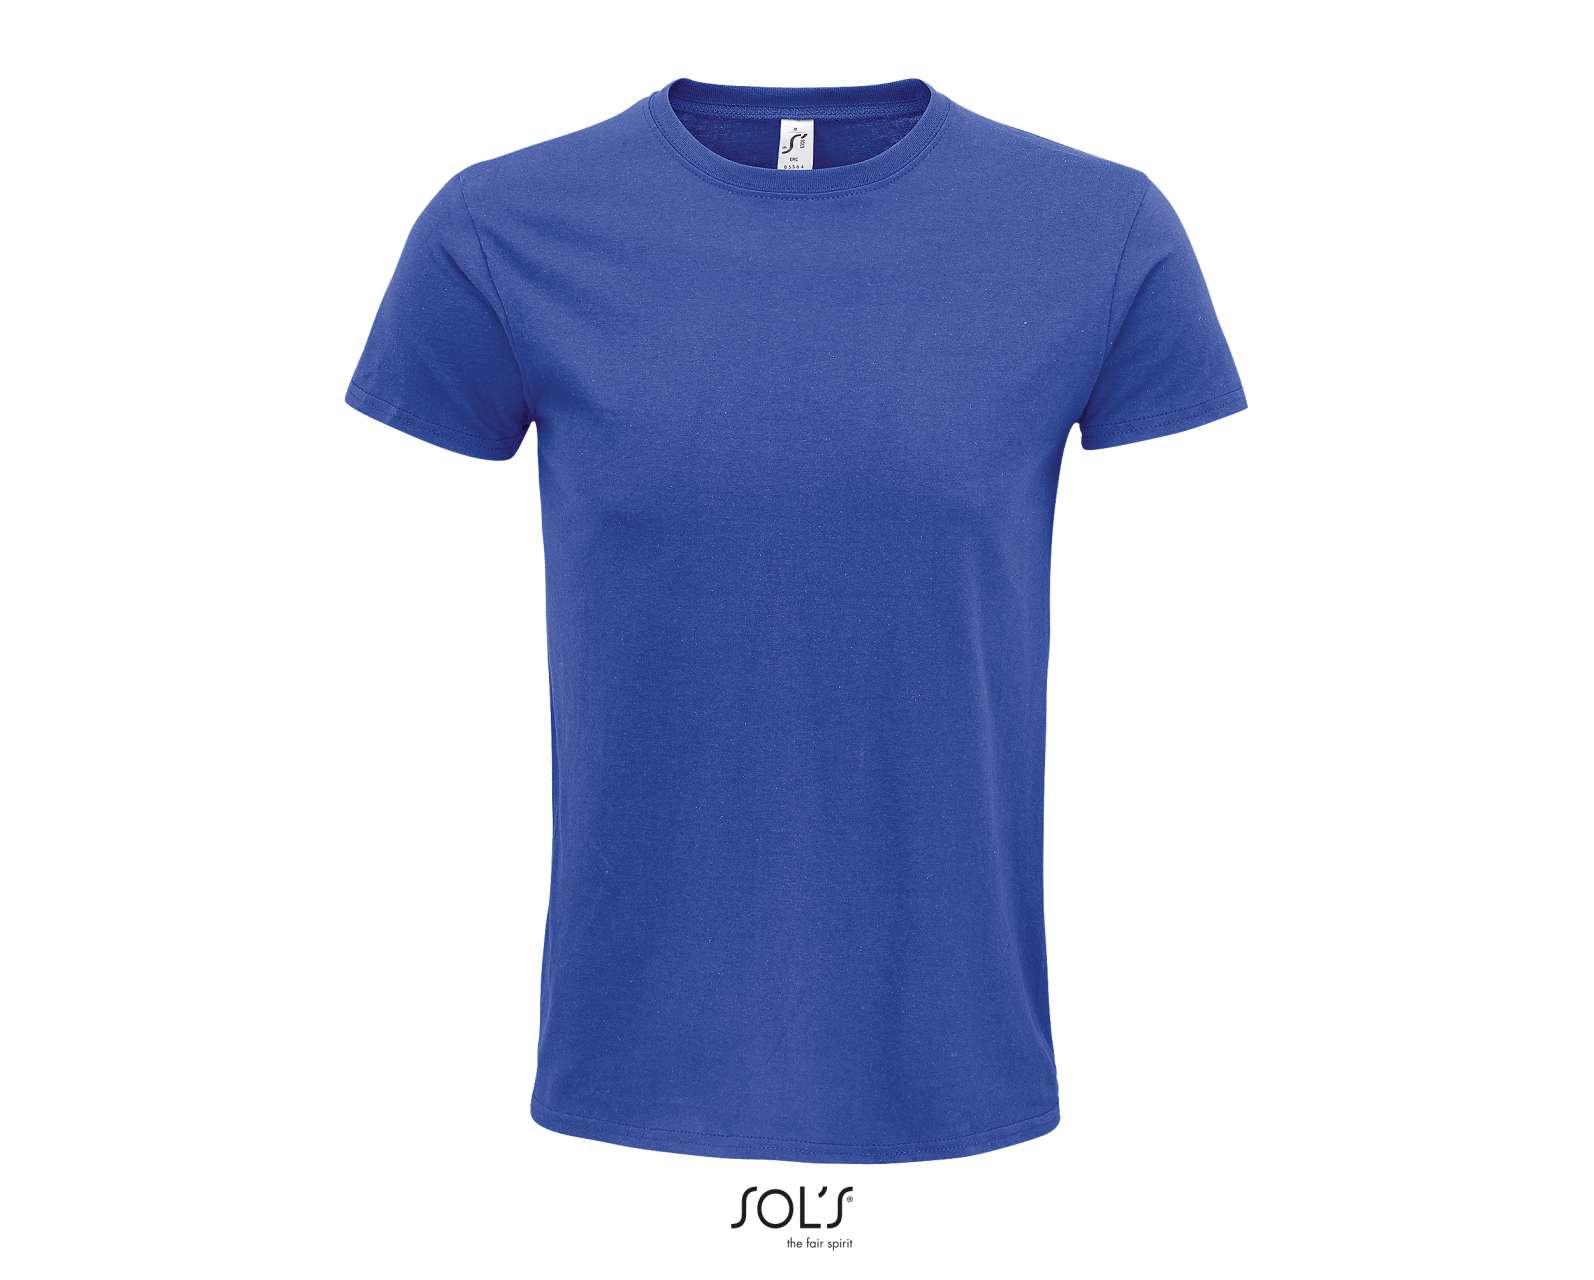 SOL'S EPIC - UNISEX ROUND-NECK FITTED JERSEY T-SHIRT